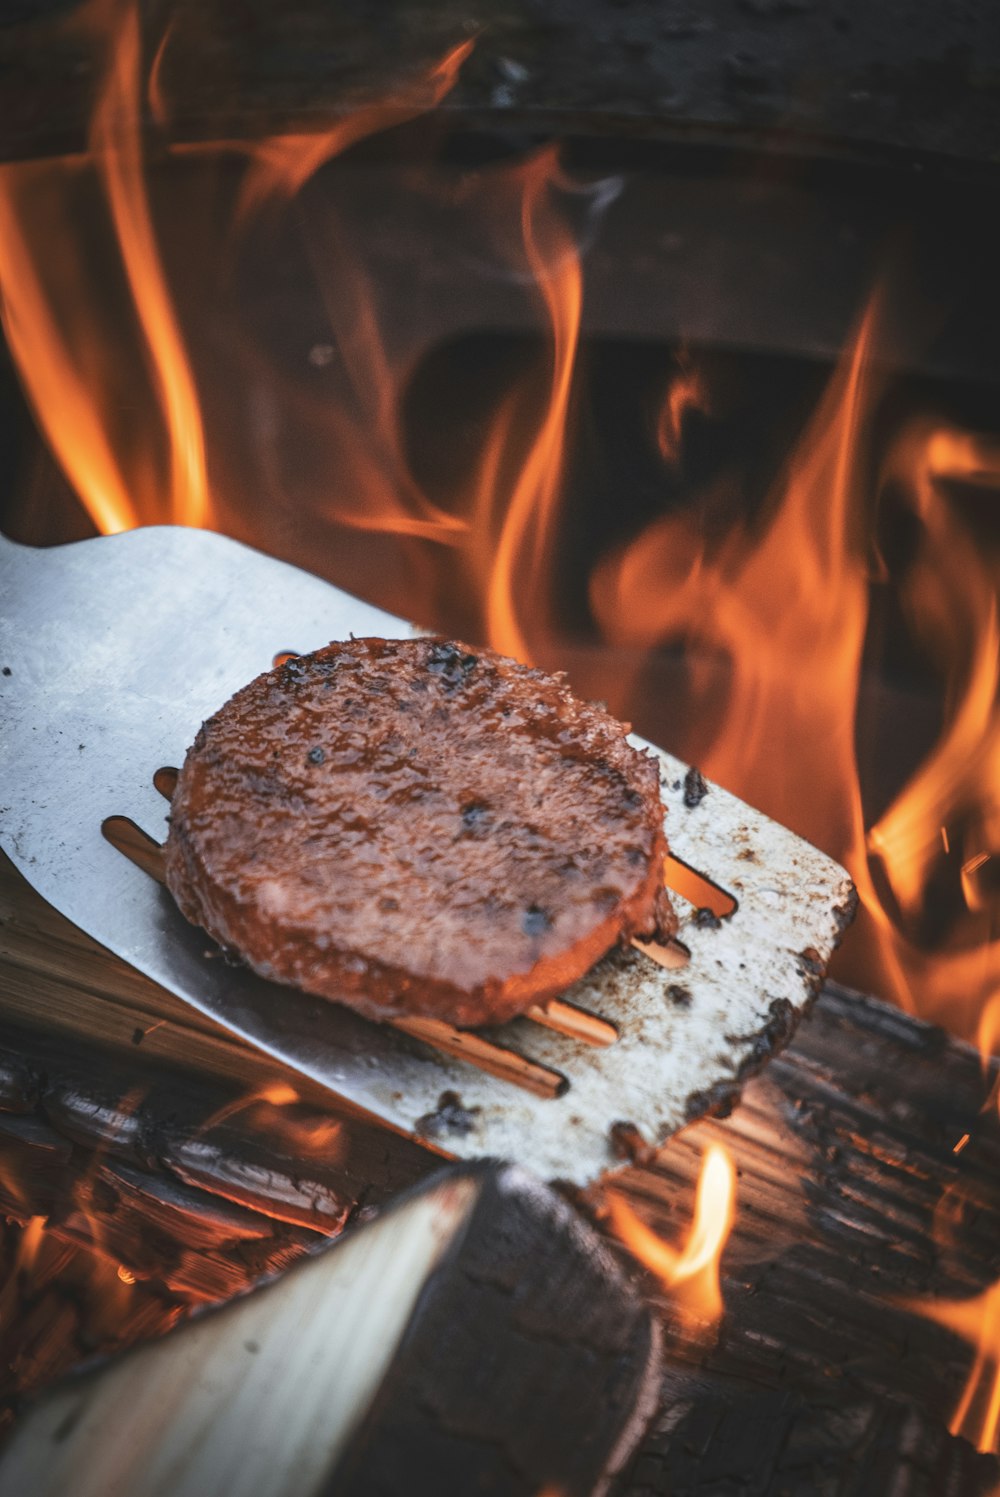 a hamburger on a grill with flames in the background